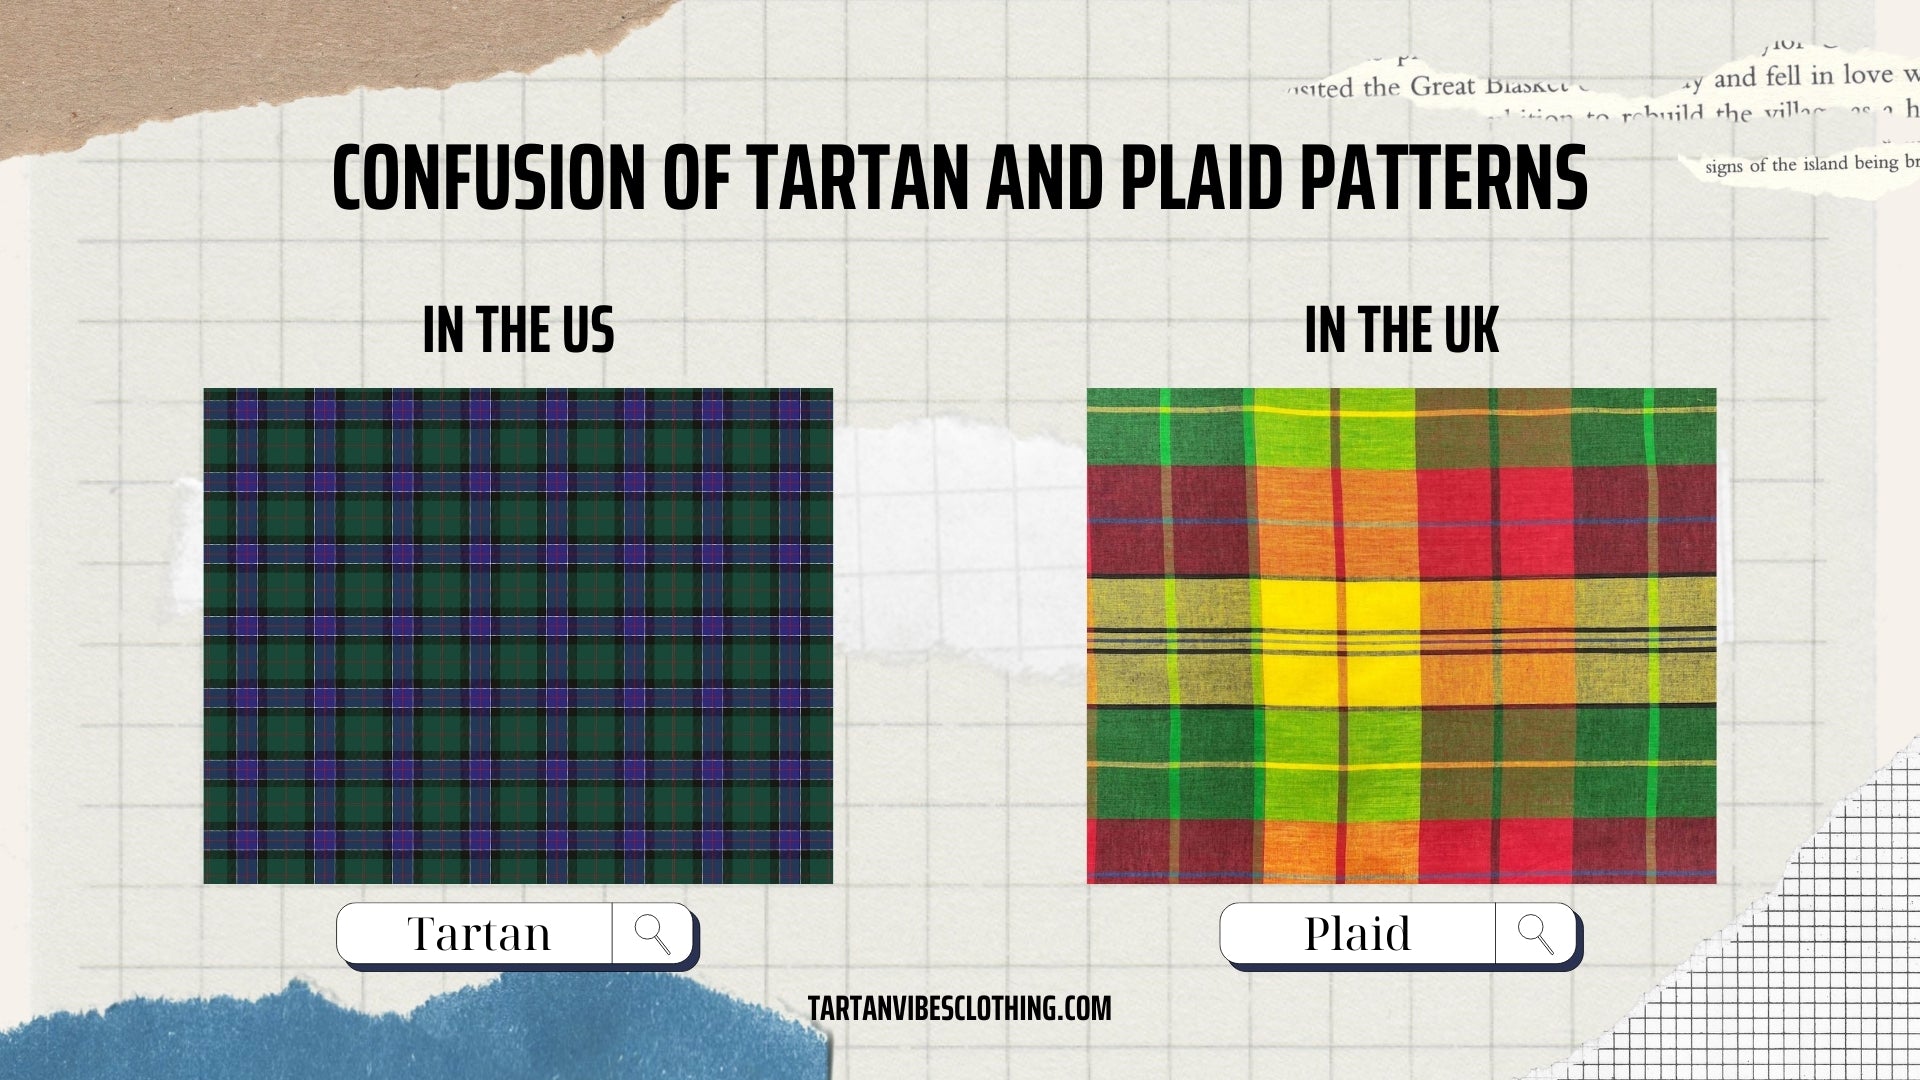 Confusion between the two concepts of tartan and plaid patterns